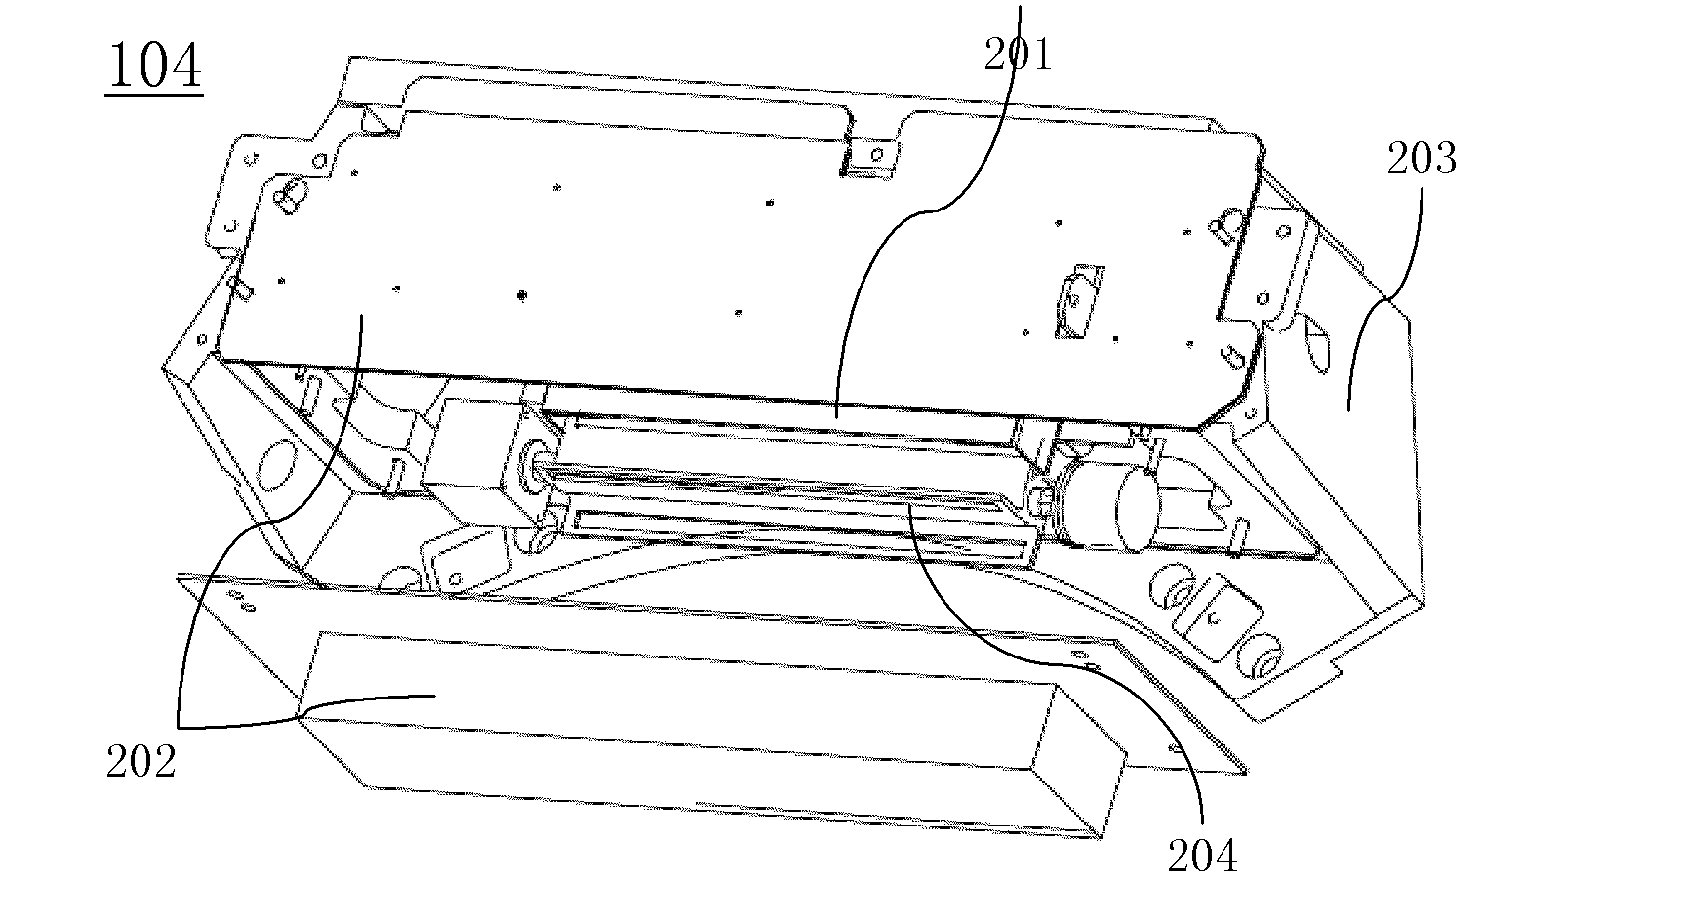 CT collimator and CT system including the CT collimator